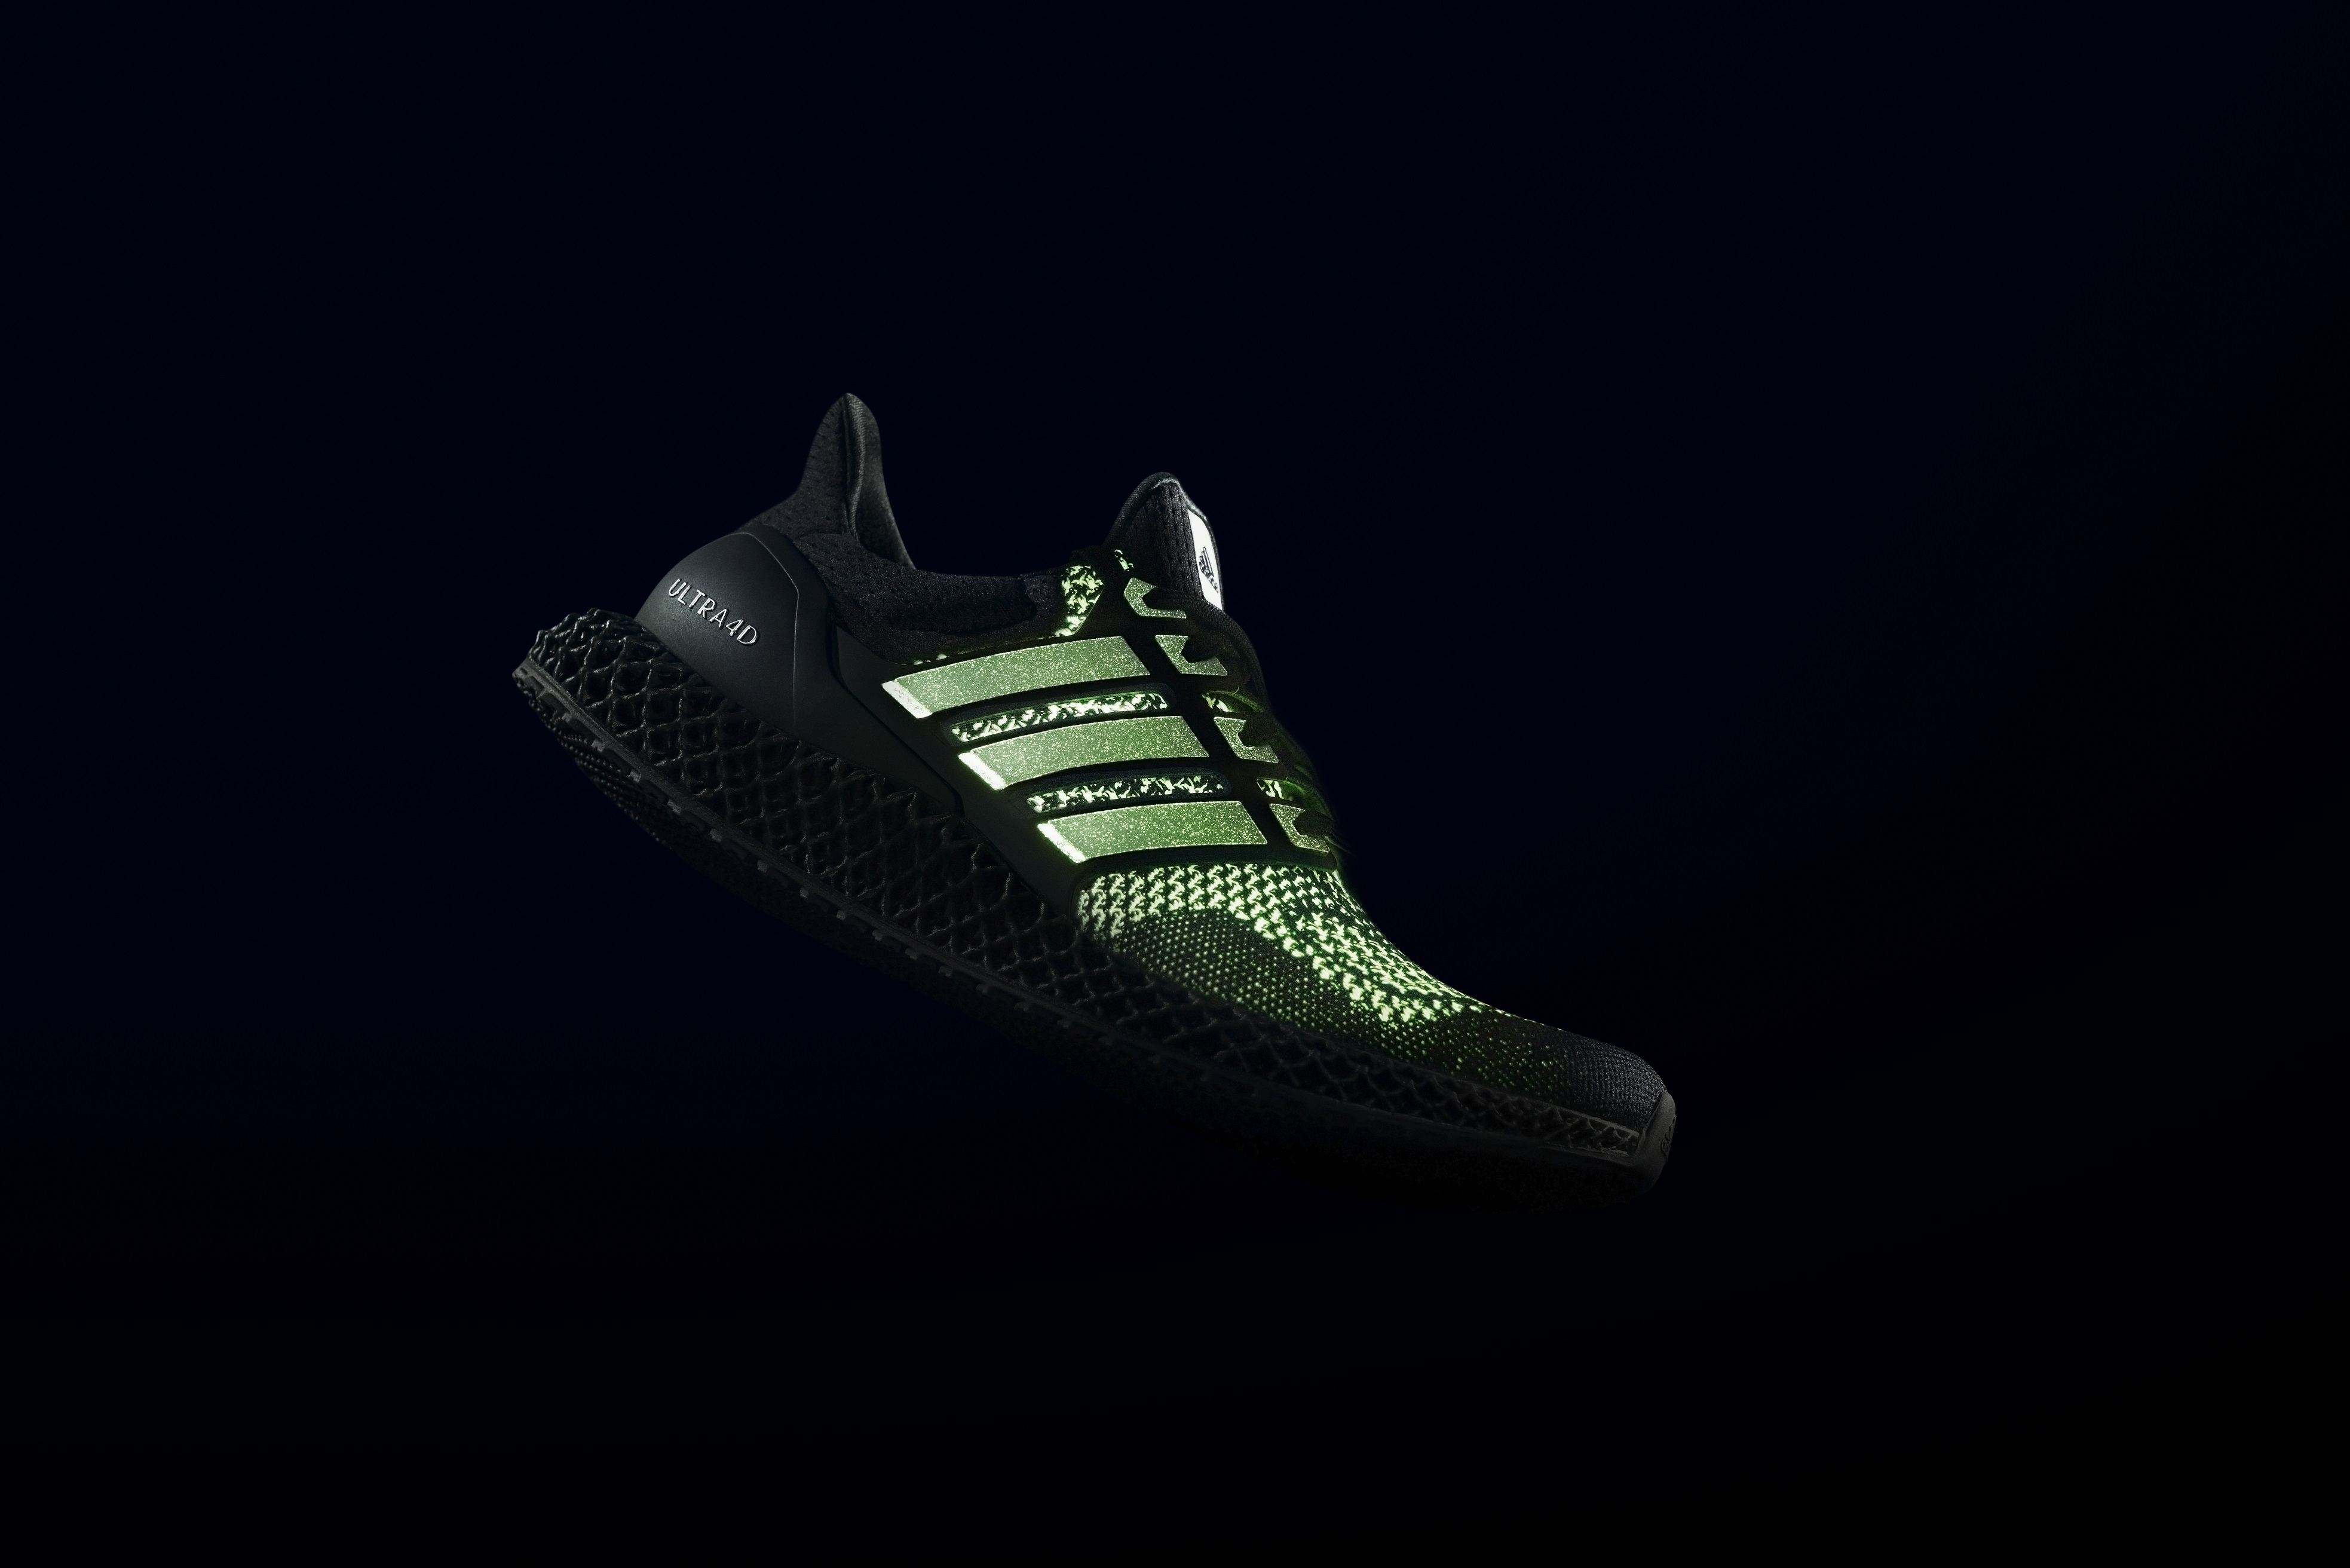 ADIDAS INTRODUCES GLOW IN THE DARK 4D RUNNING SHOE: THE ULTRA4D